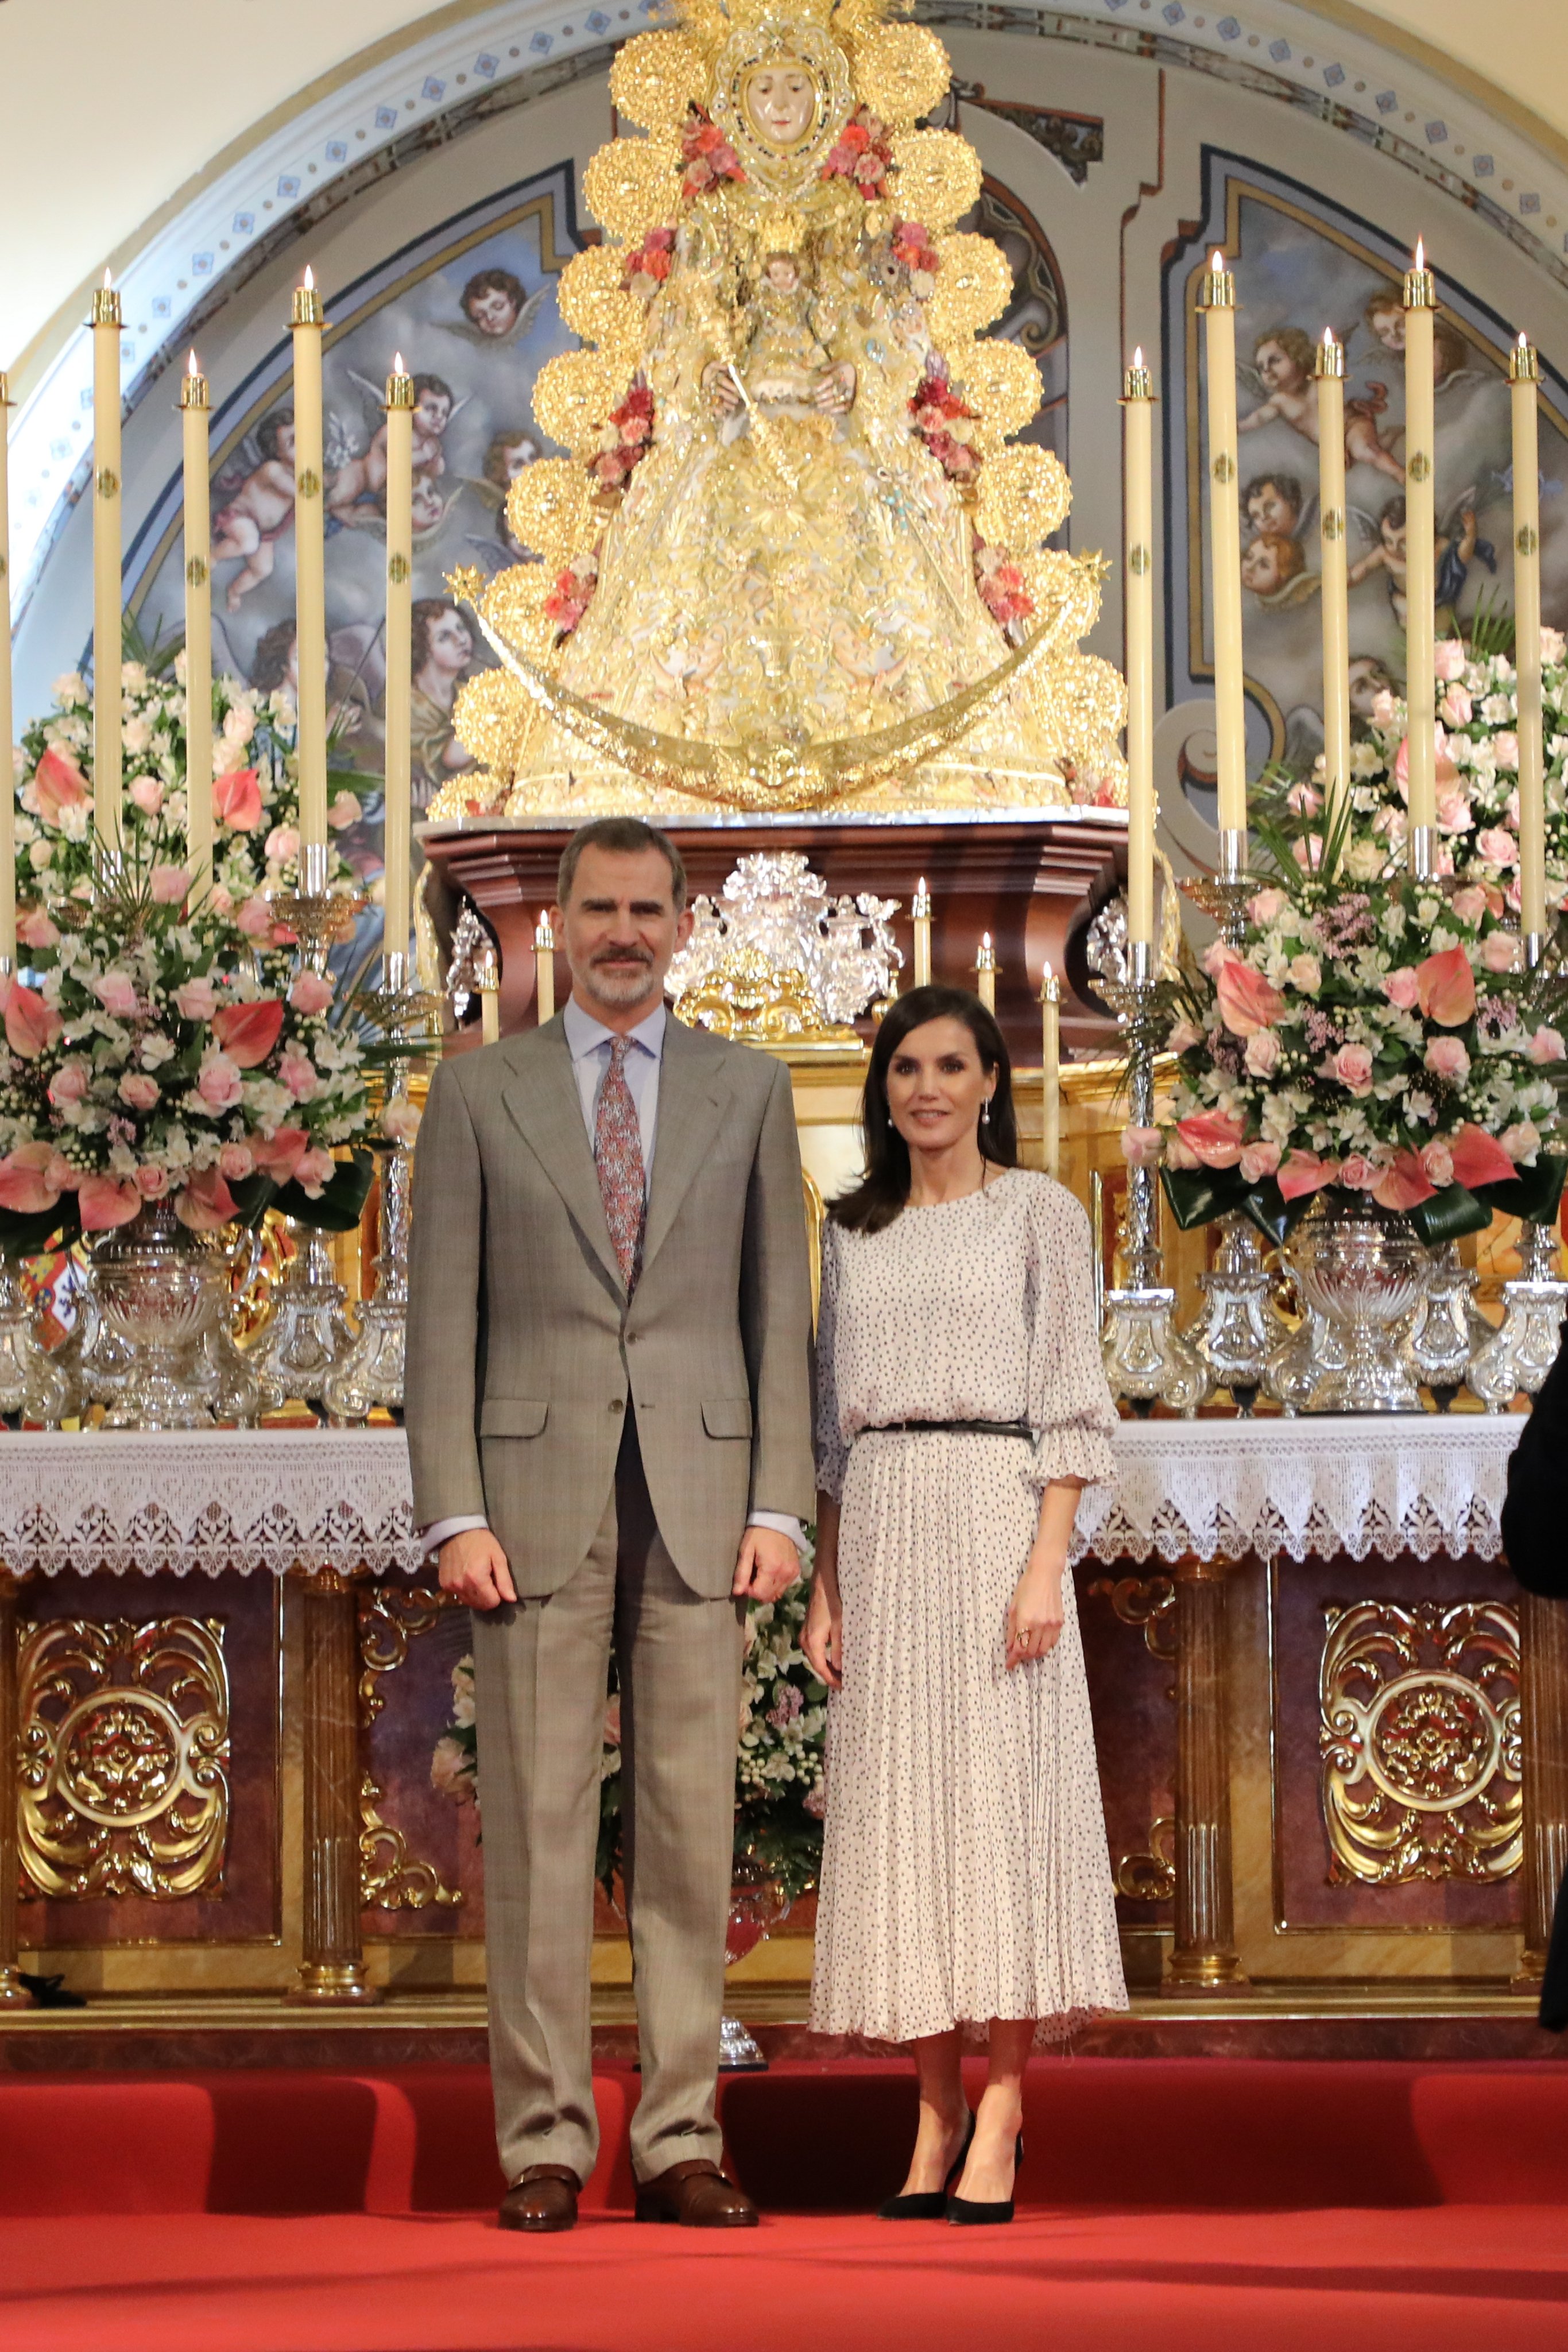 King Felipe VI and Queen Letizia after visiting the parish of Nuestra Senora De La Asuncion on the Marian Jubillee Year of Rocio Almonte (Huelva) event during their to Almonte on Febraury 14, 2020 in Almonte, Spain. / Source: Getty Images